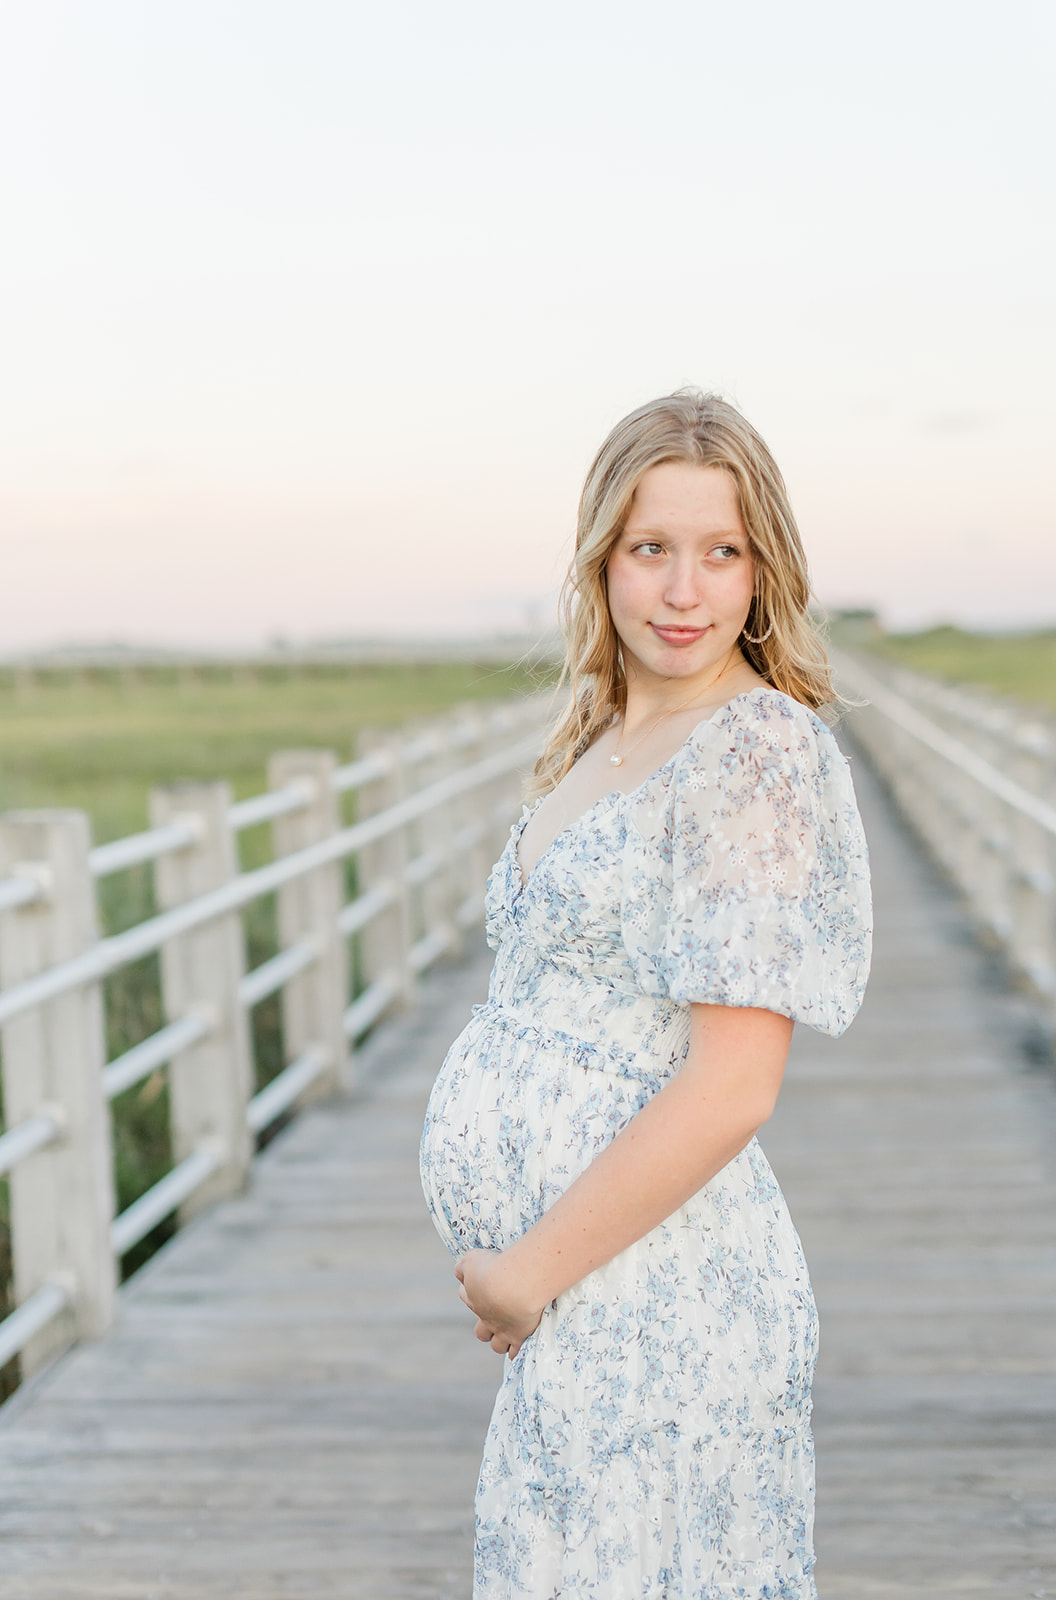 A mom to be in a blue floral dress looks over her shoulder while standing on a beach boardwalk thanks to Park Avenue Fertility